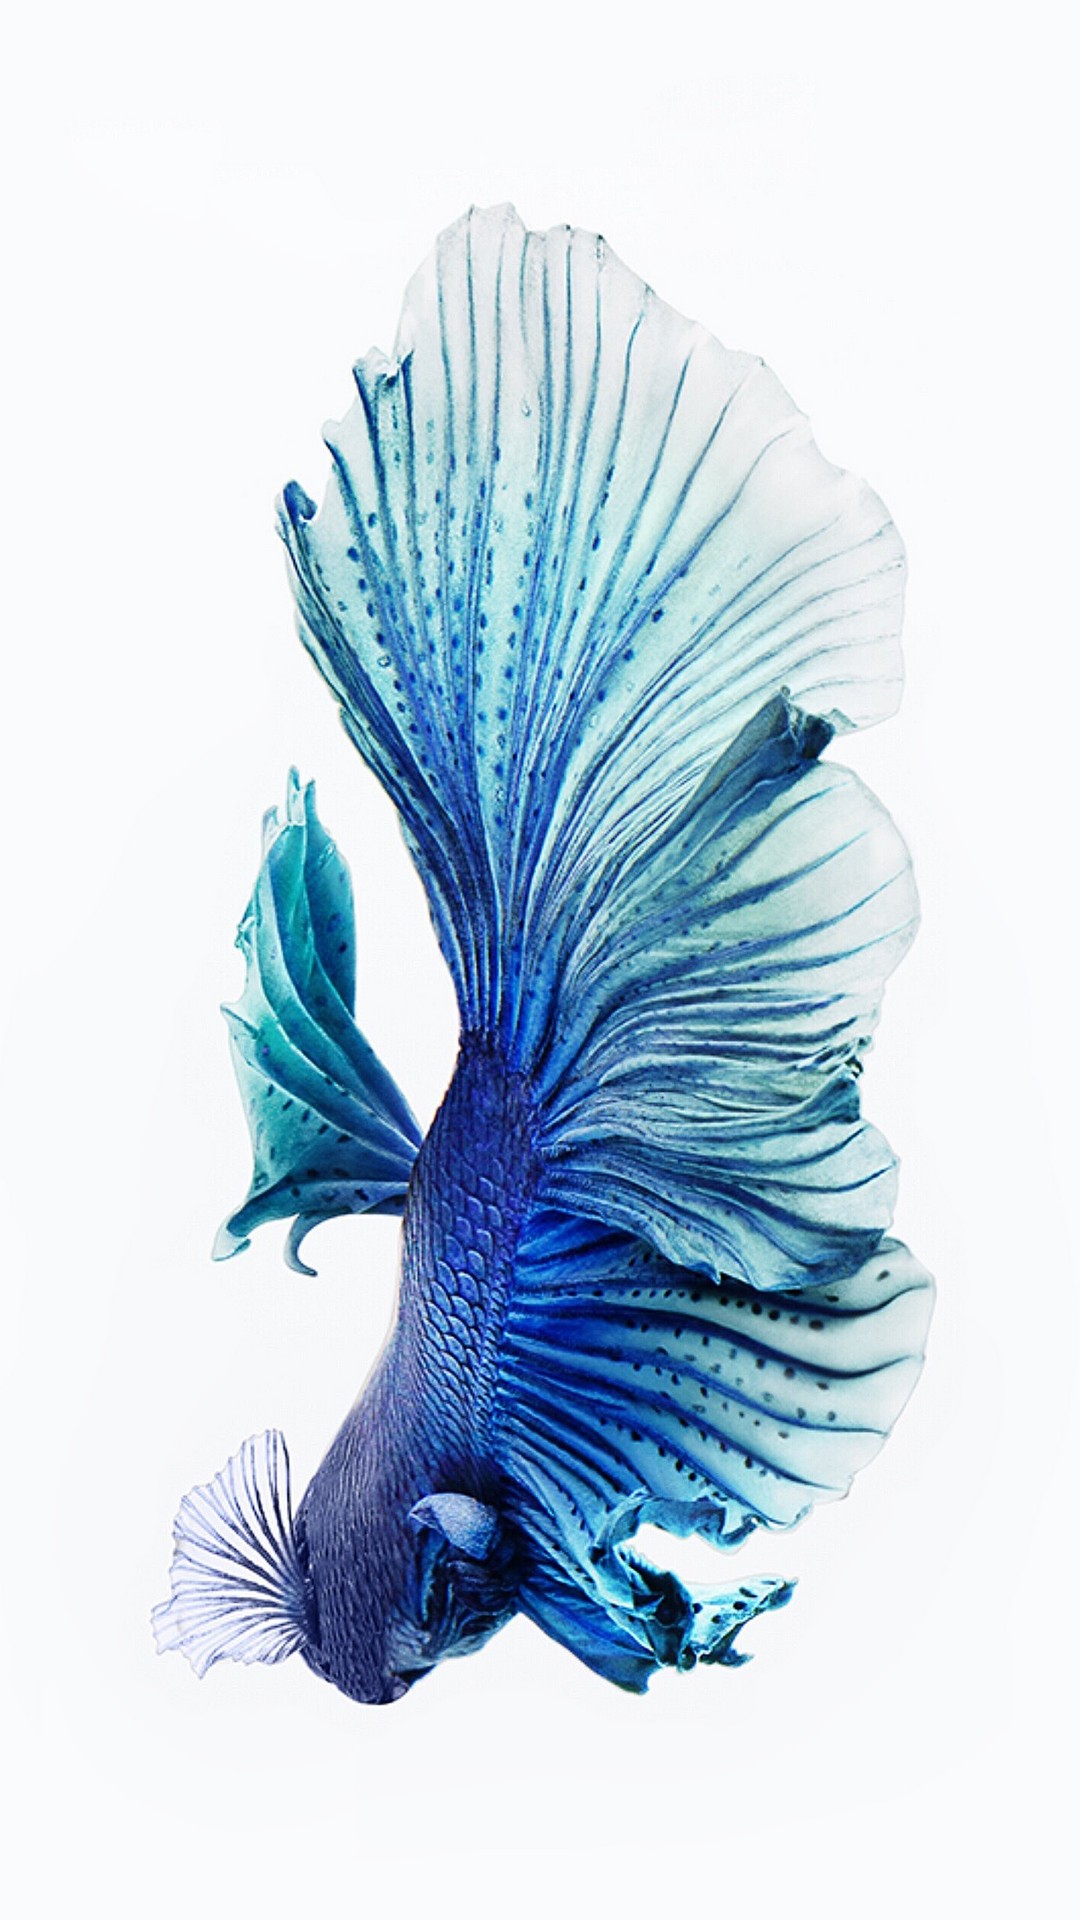 Iphone 6s Wallpaper Lock Screen With High-resolution - Iphone 6s Wallpaper Hd Fish - HD Wallpaper 